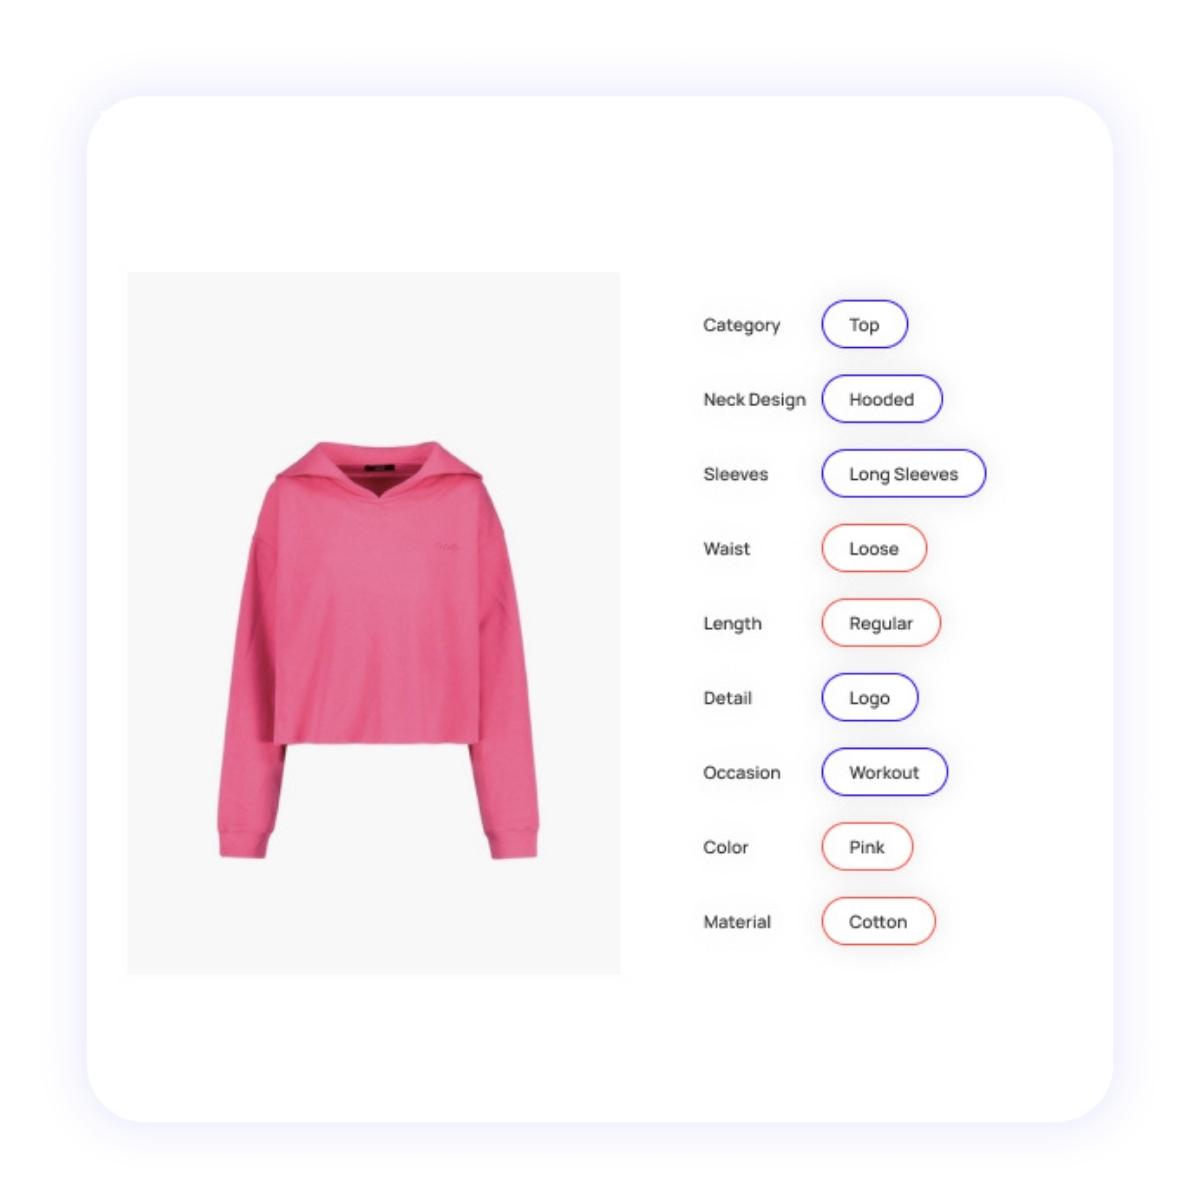 Feature extraction for a pink hooded top 